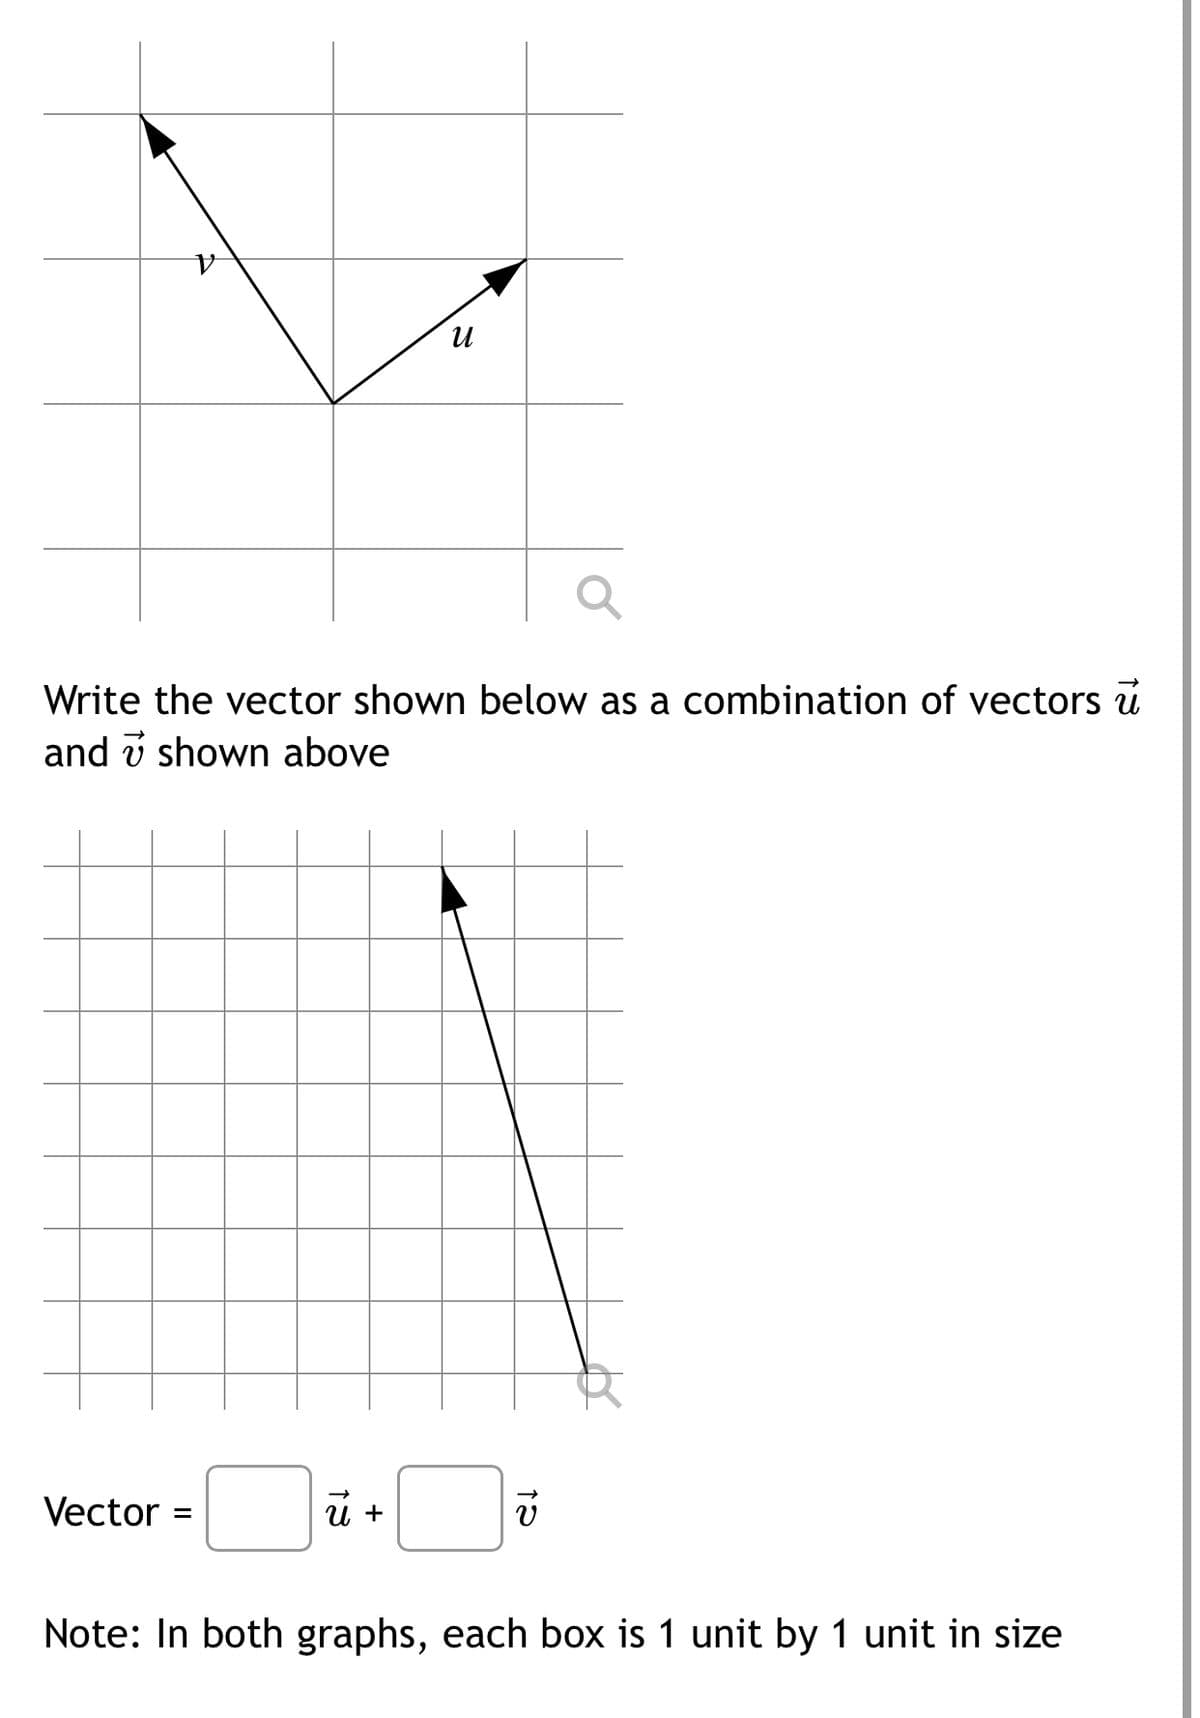 и
Write the vector shown below as a combination of vectors u
and v shown above
Vector
%D
Note: In both graphs, each box is 1 unit by 1 unit in size
